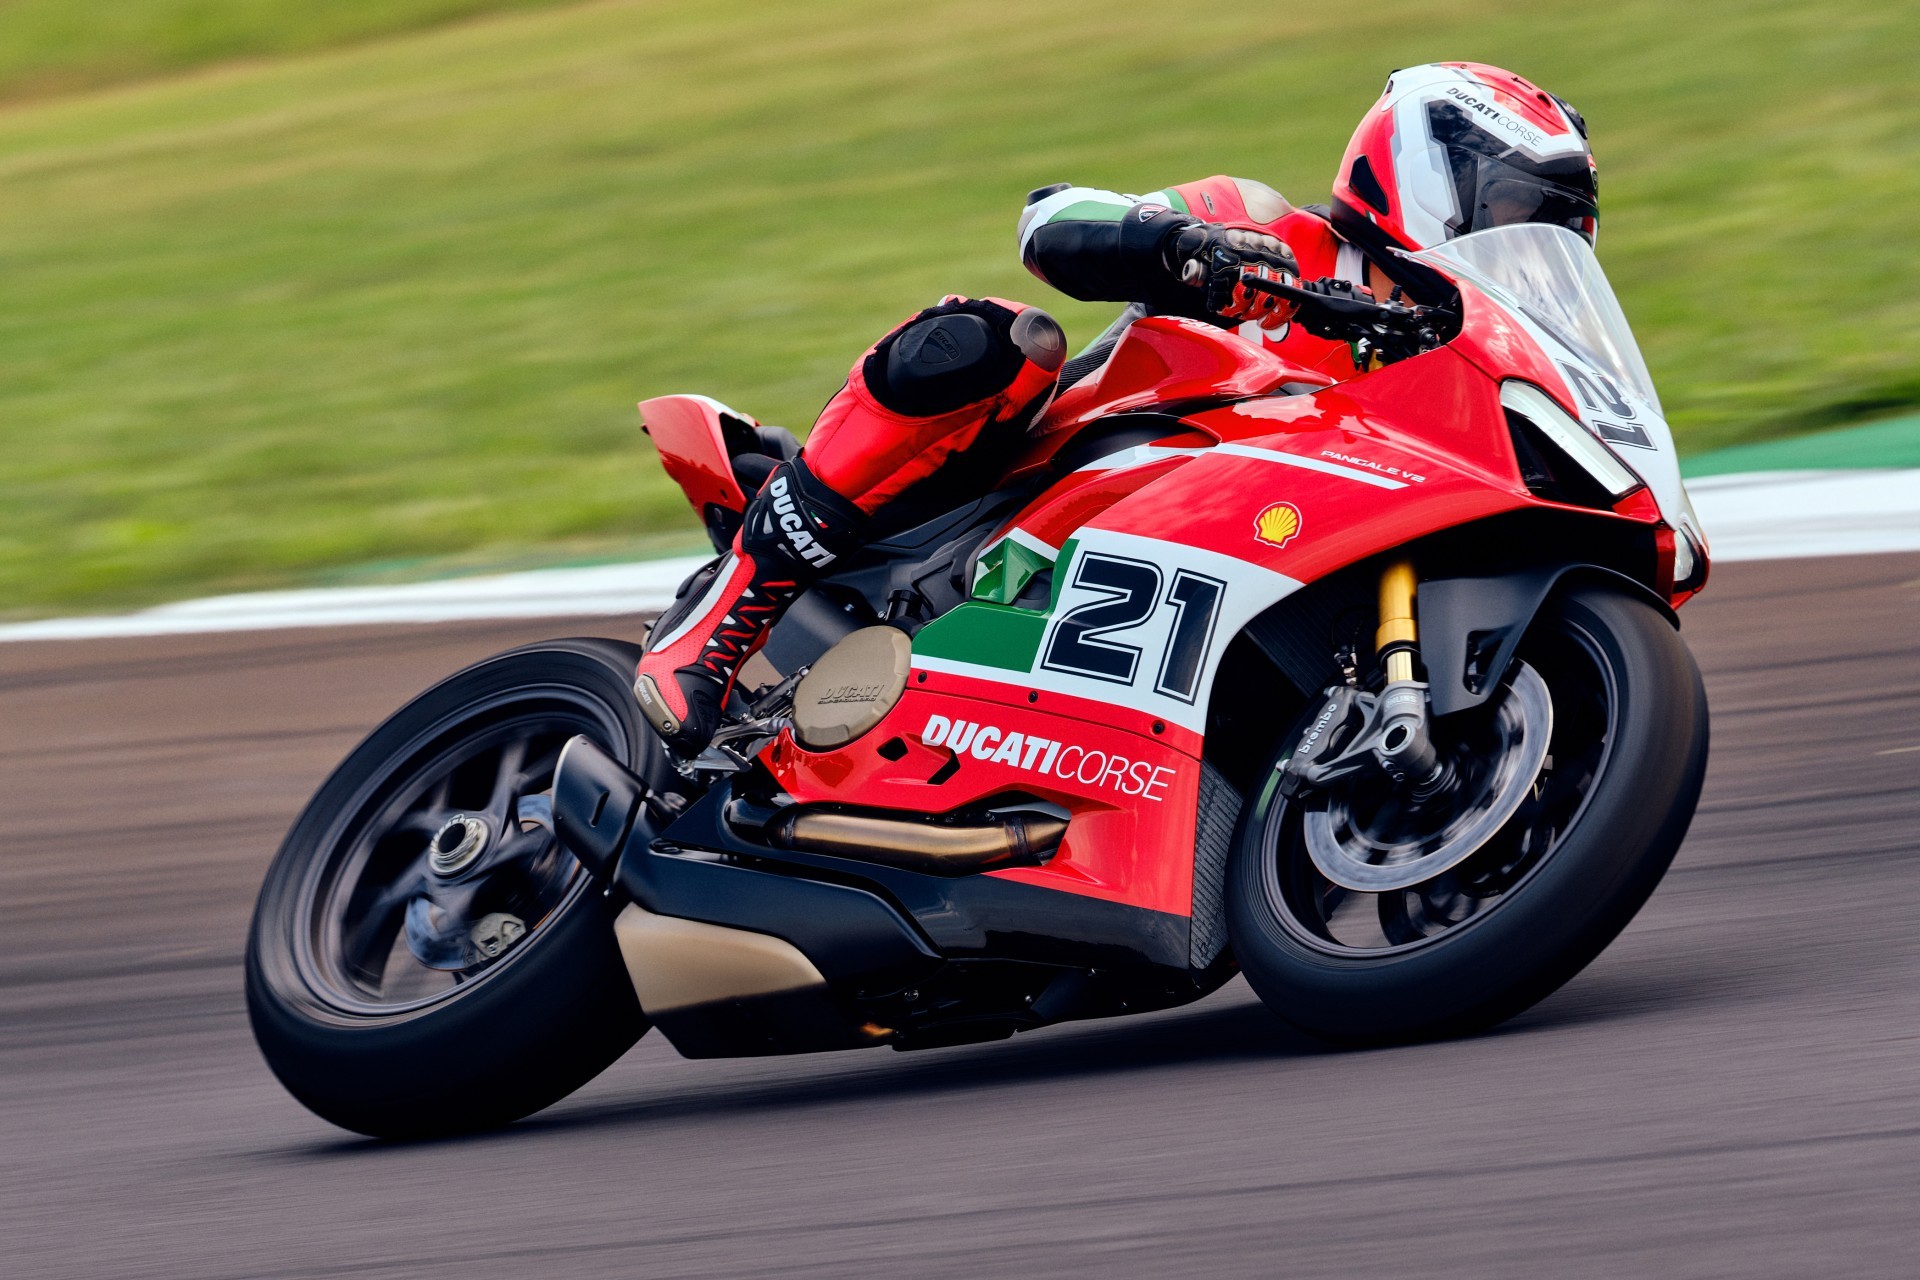 Ducati Panigale V2 Bayliss 1st Championship 20th Anniversary Honors a